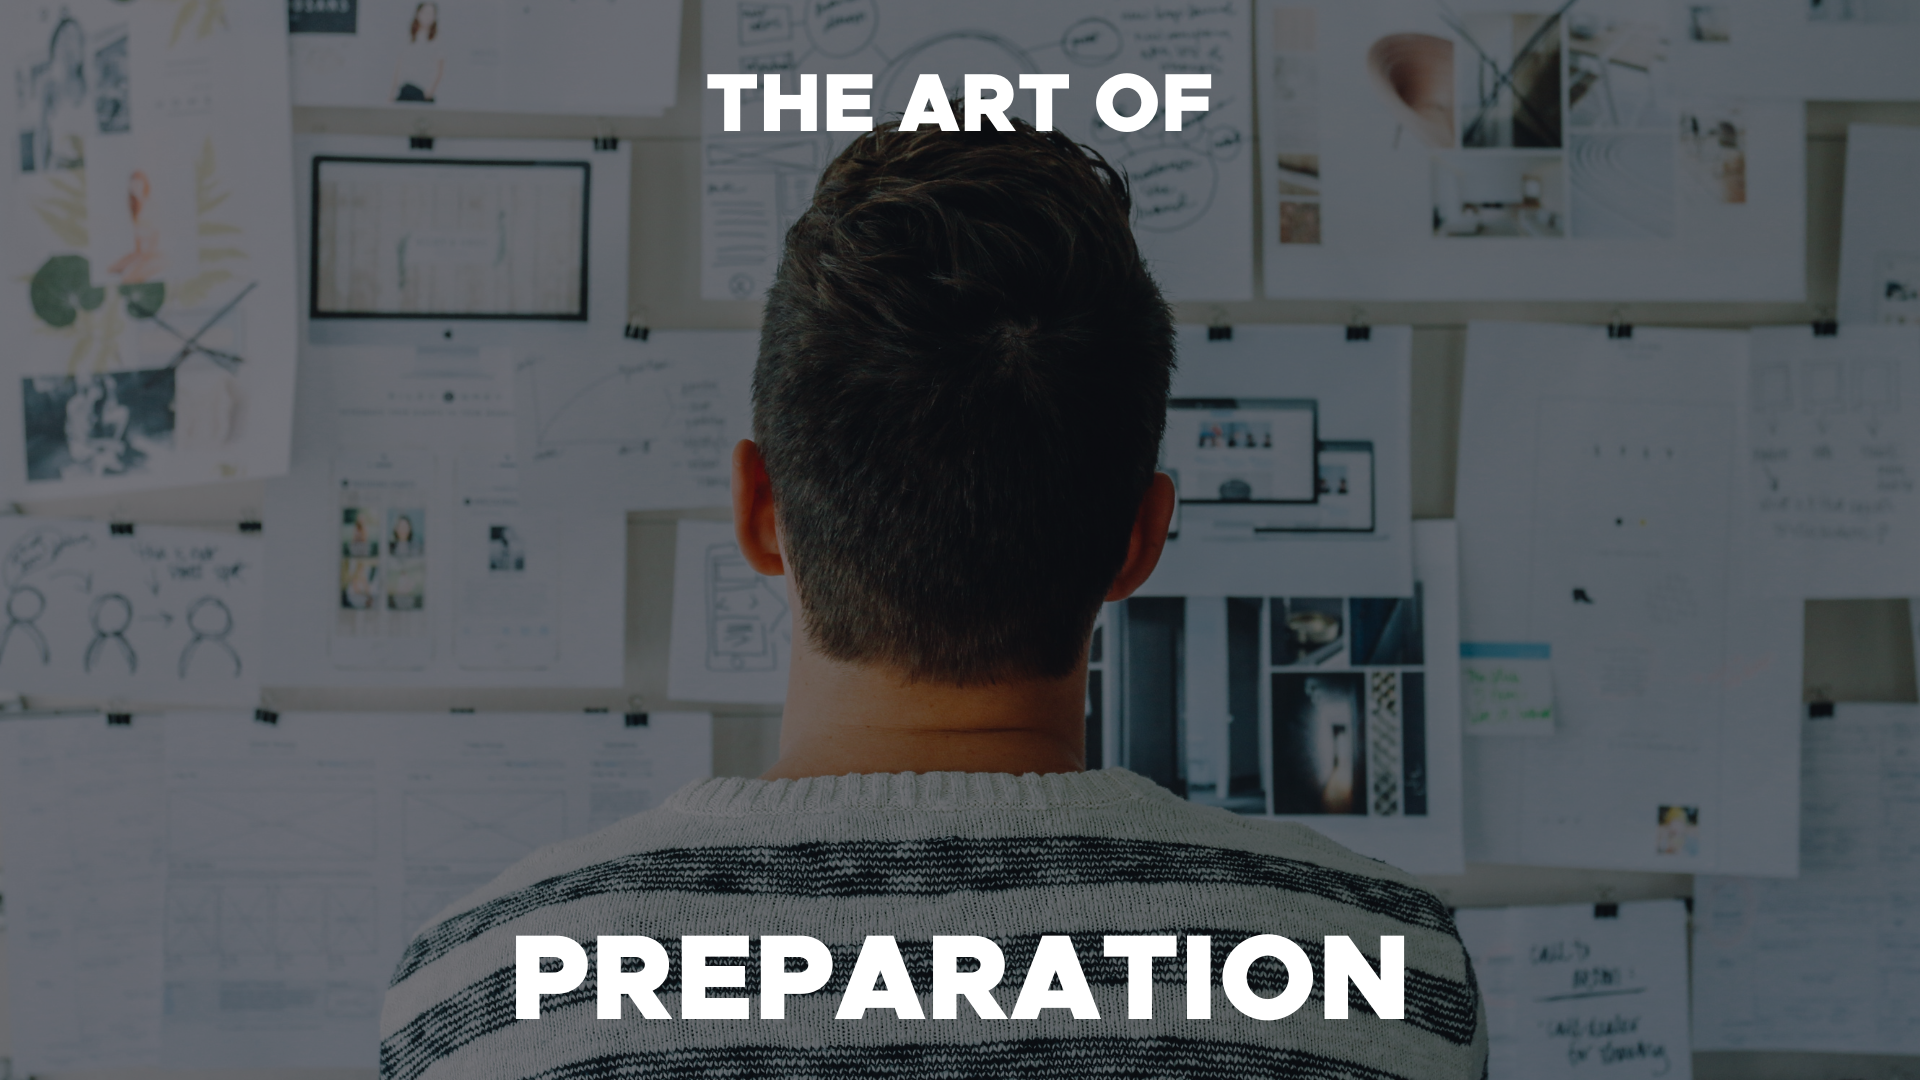 the art of preparation (1920 x 1080 px)